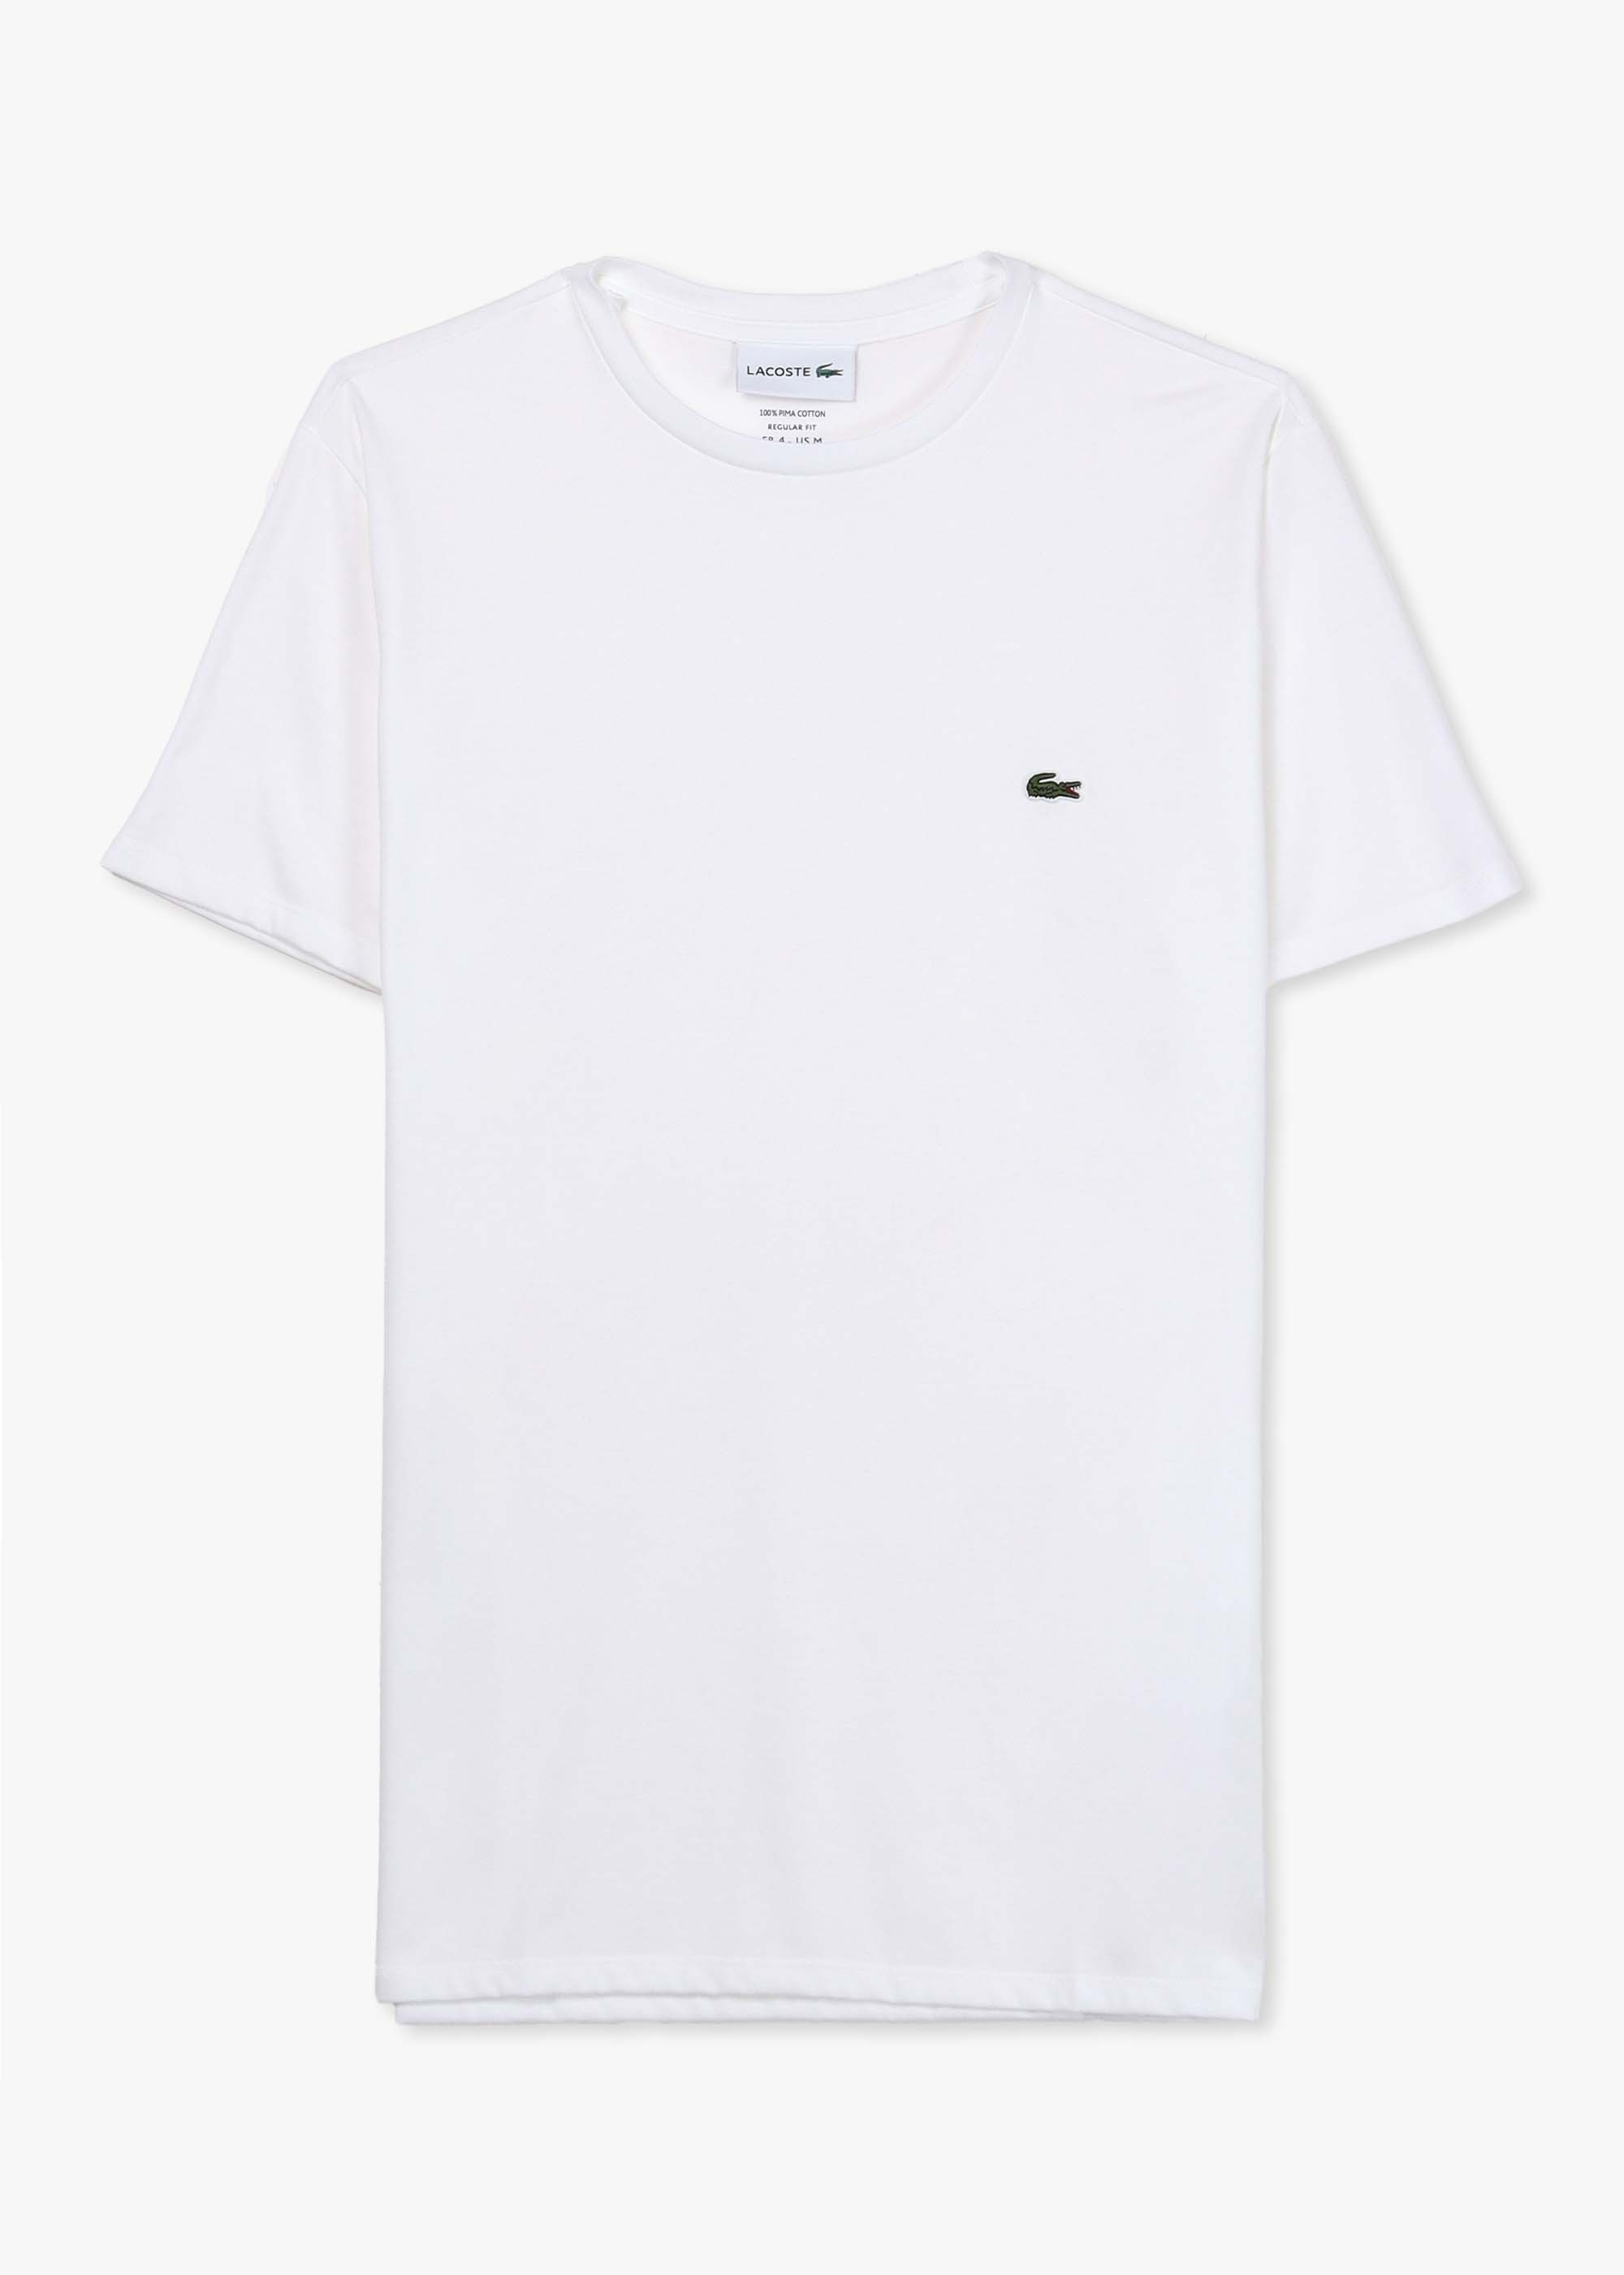 Lacoste Mens Pima Cotton Jersey T-shirt In White